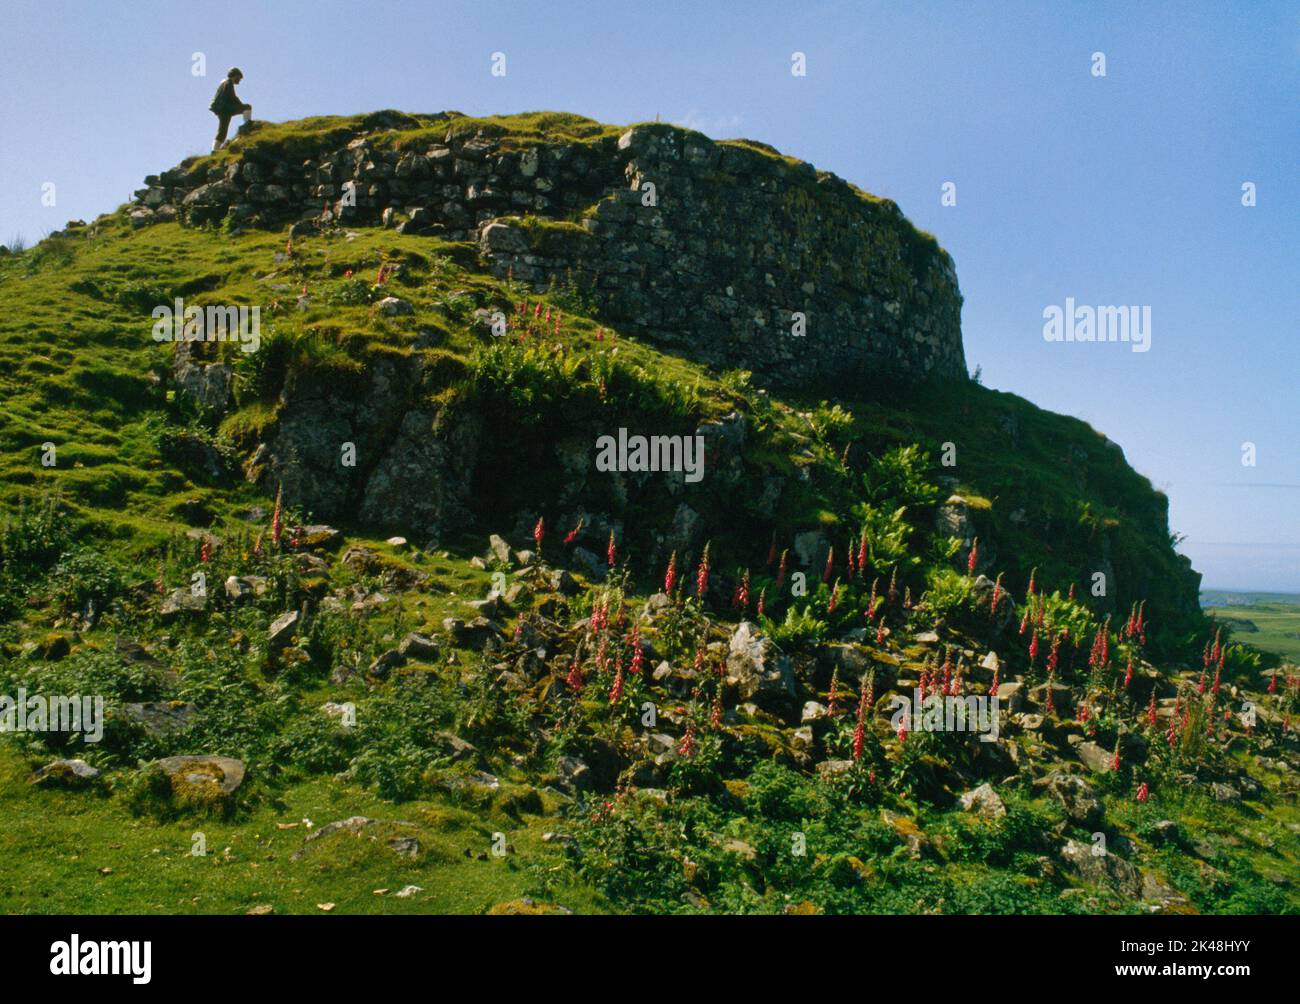 View SE of the exterior of Dun Beag Iron Age broch situated on a rocky knoll at Struanmore overlooking Loch Bracadale, Isle of Skye, Scotland, UK. Stock Photo